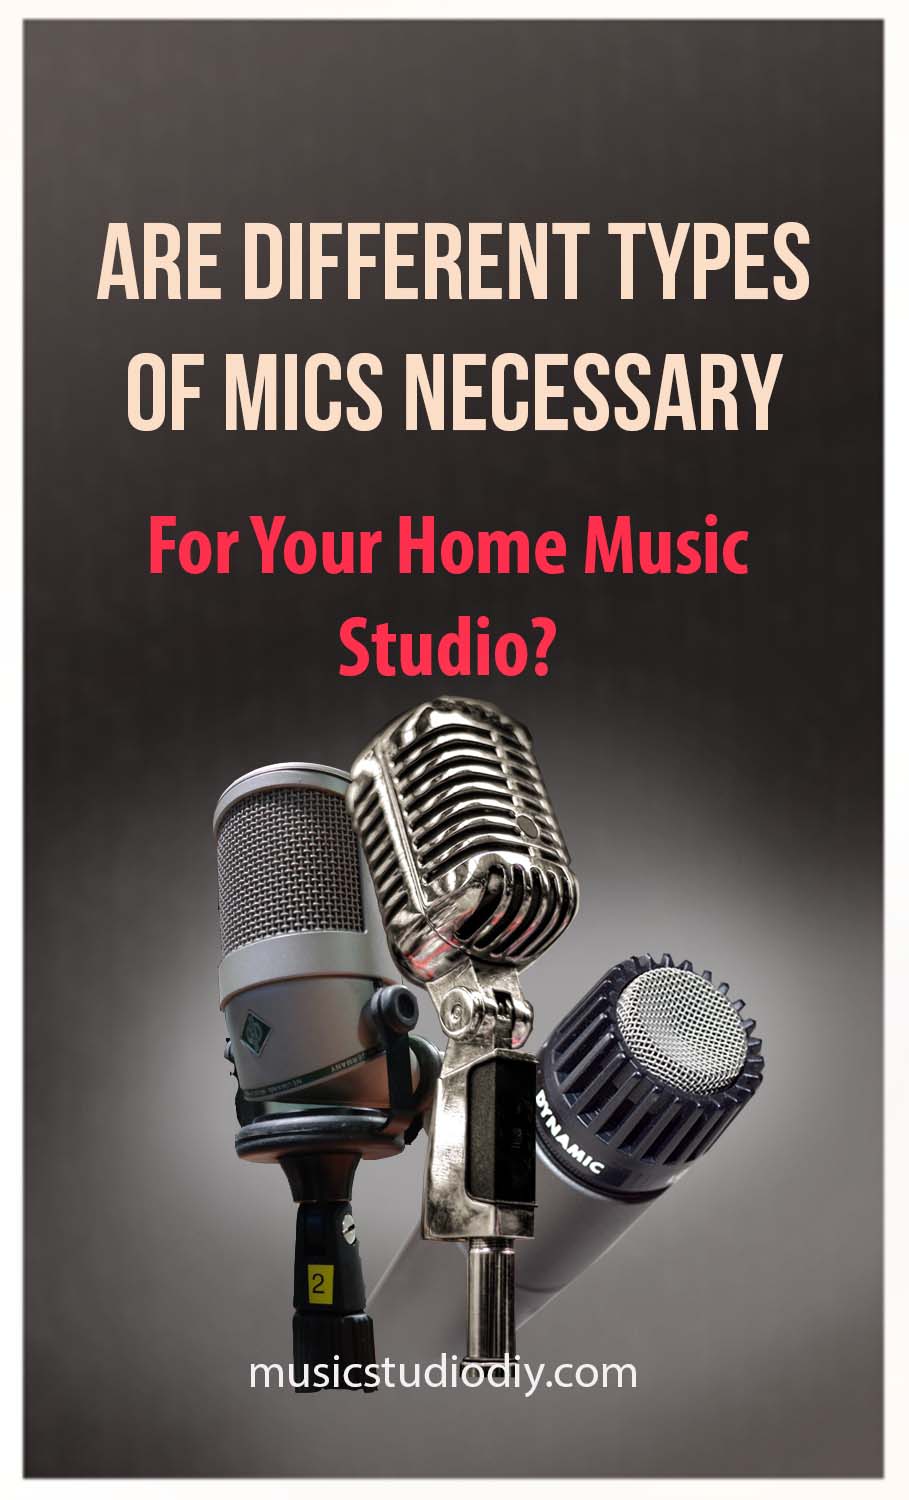 Are Different types of Mics Necessary